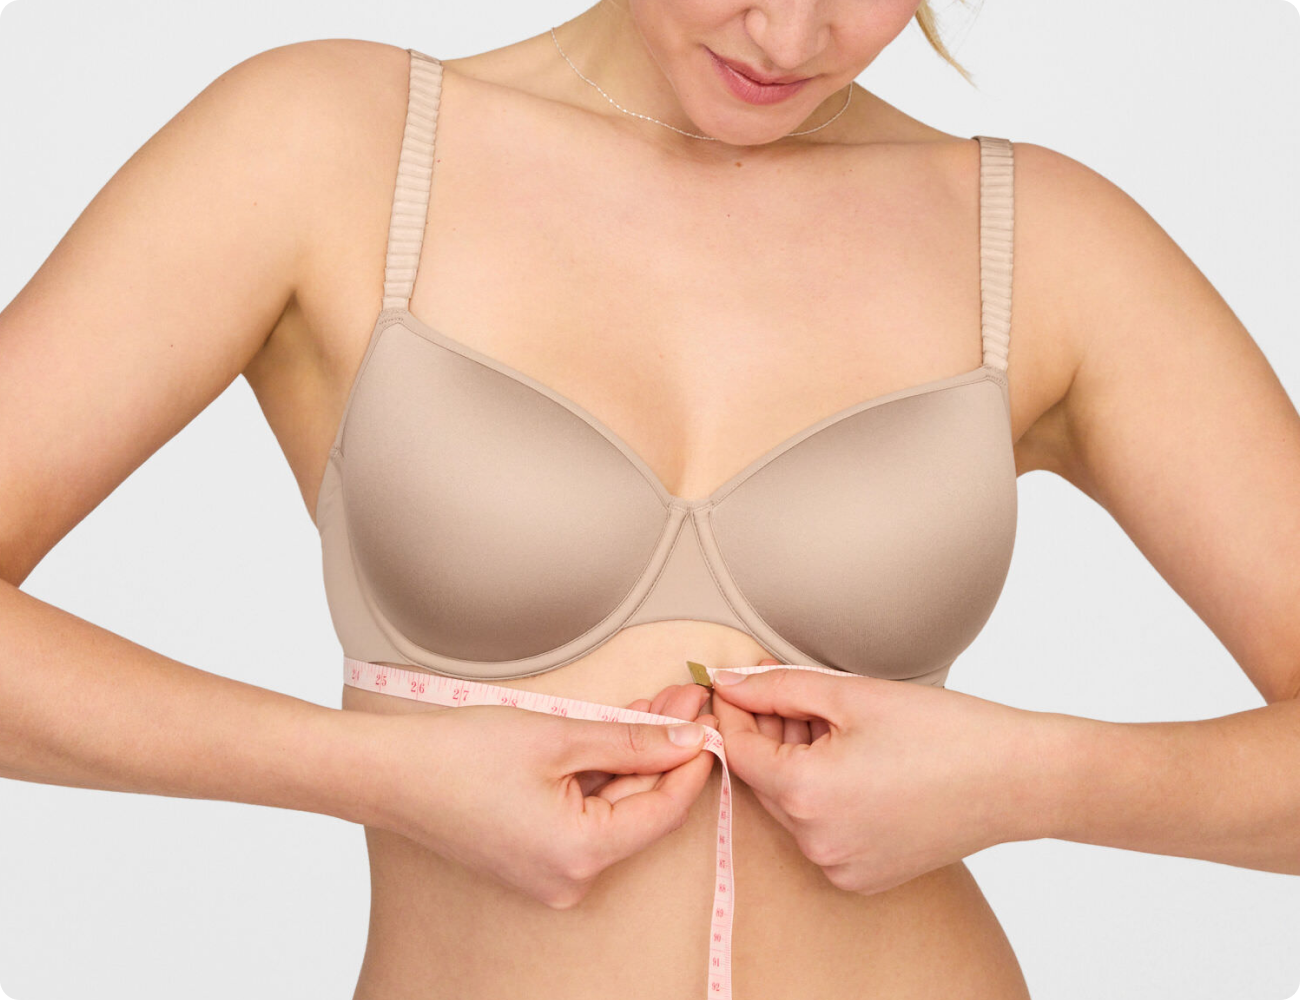 Miladys - 80% of women are wearing the wrong bra size. Are you one